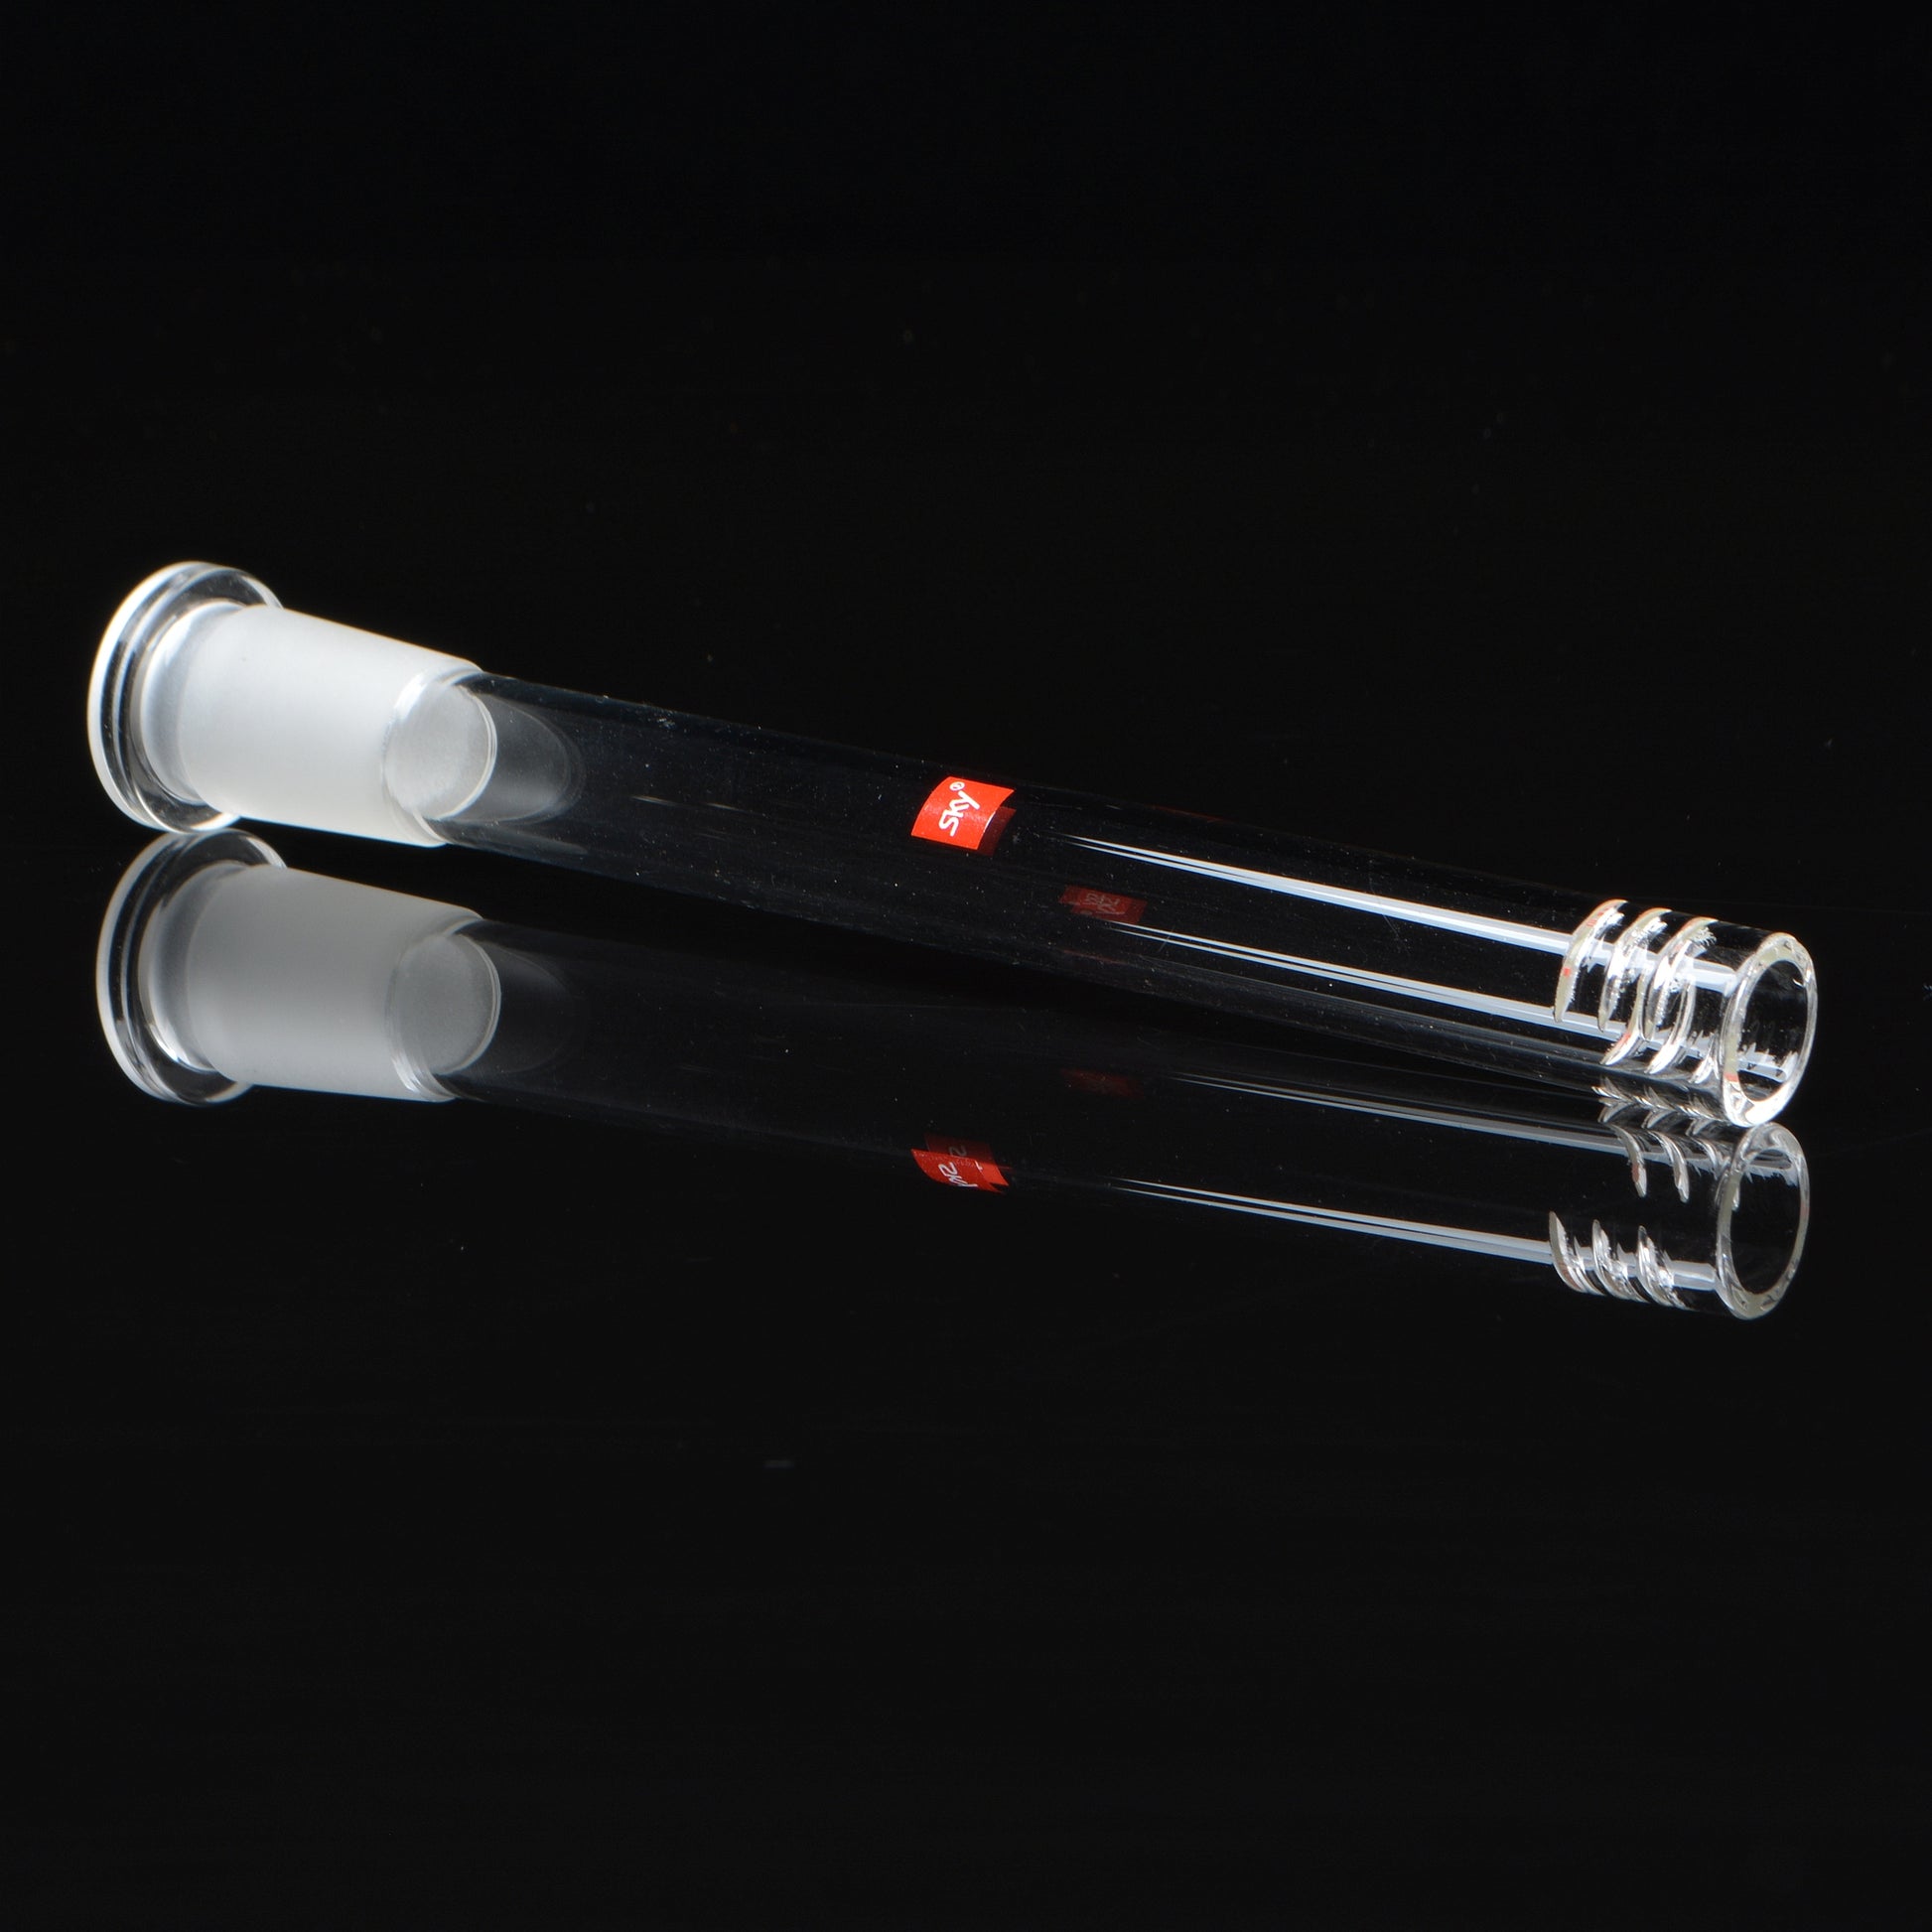 Reflective shot of the 6-slitt style downstem, rotated 45 degrees